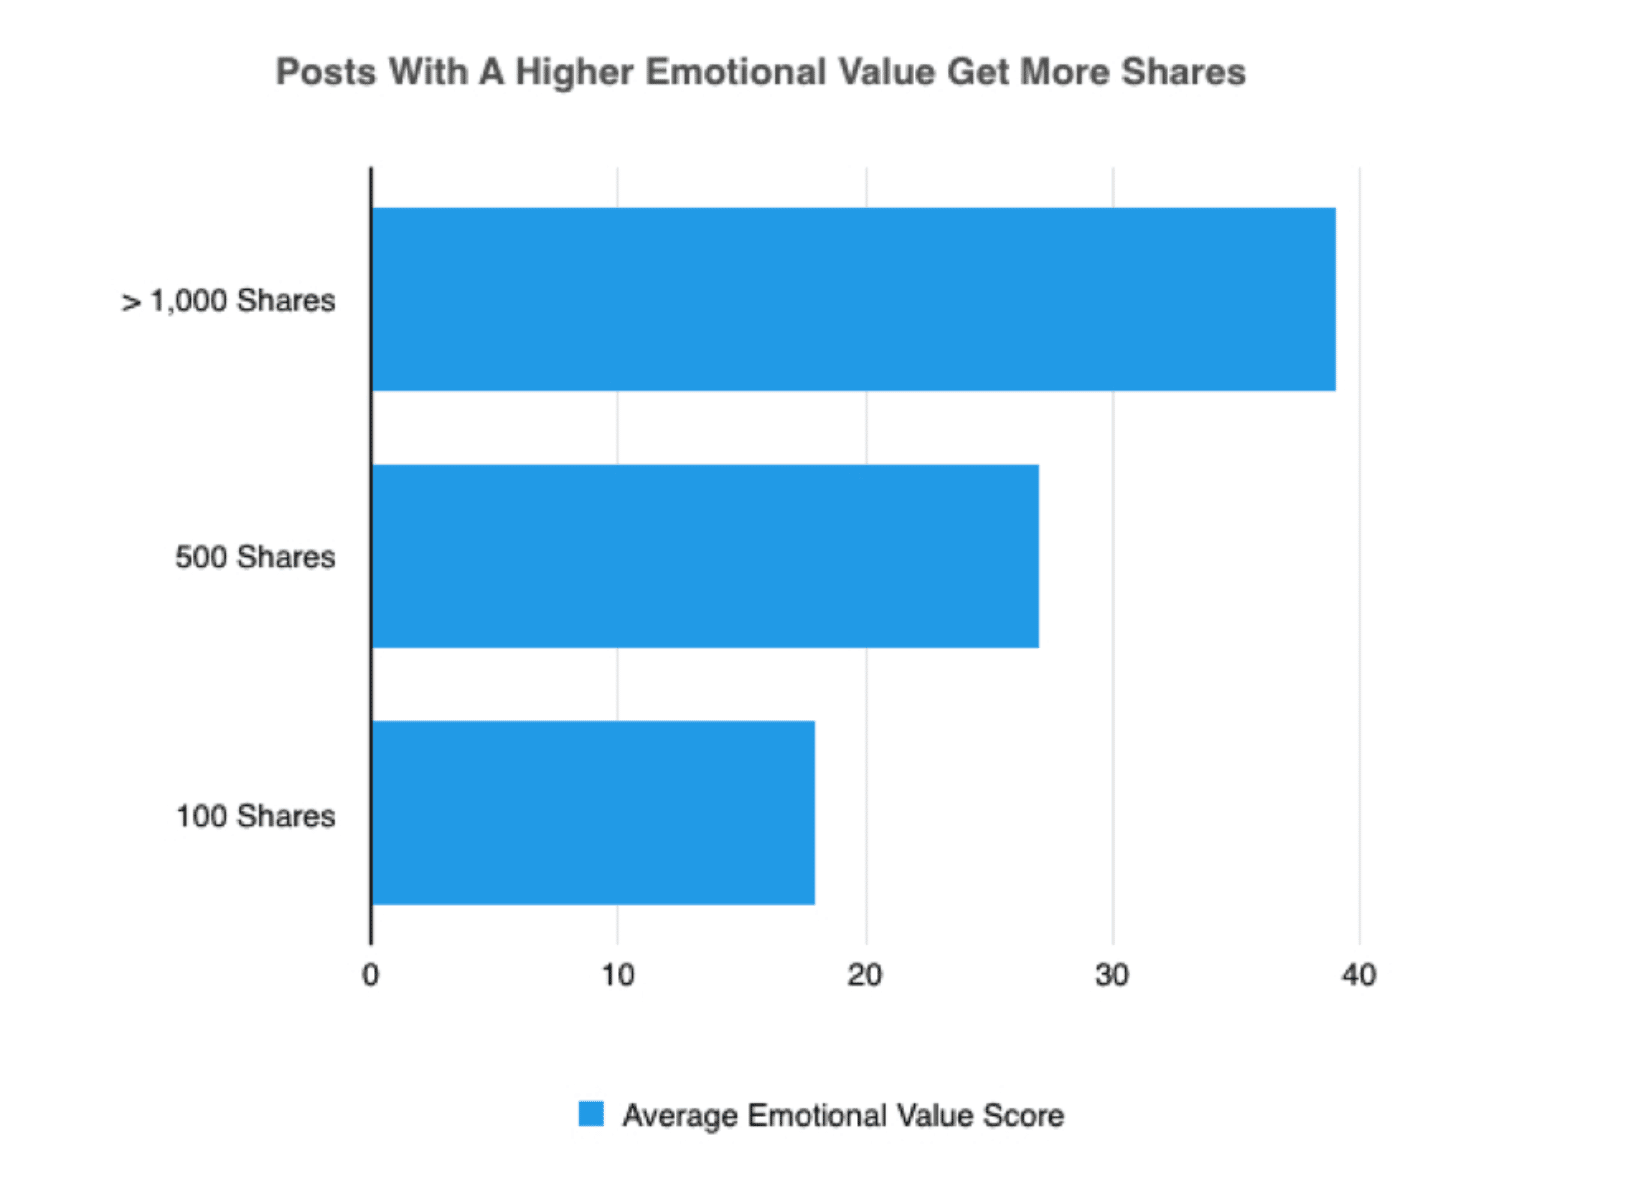 bar graph shows that posts with high emotional value generate more shares on social platforms